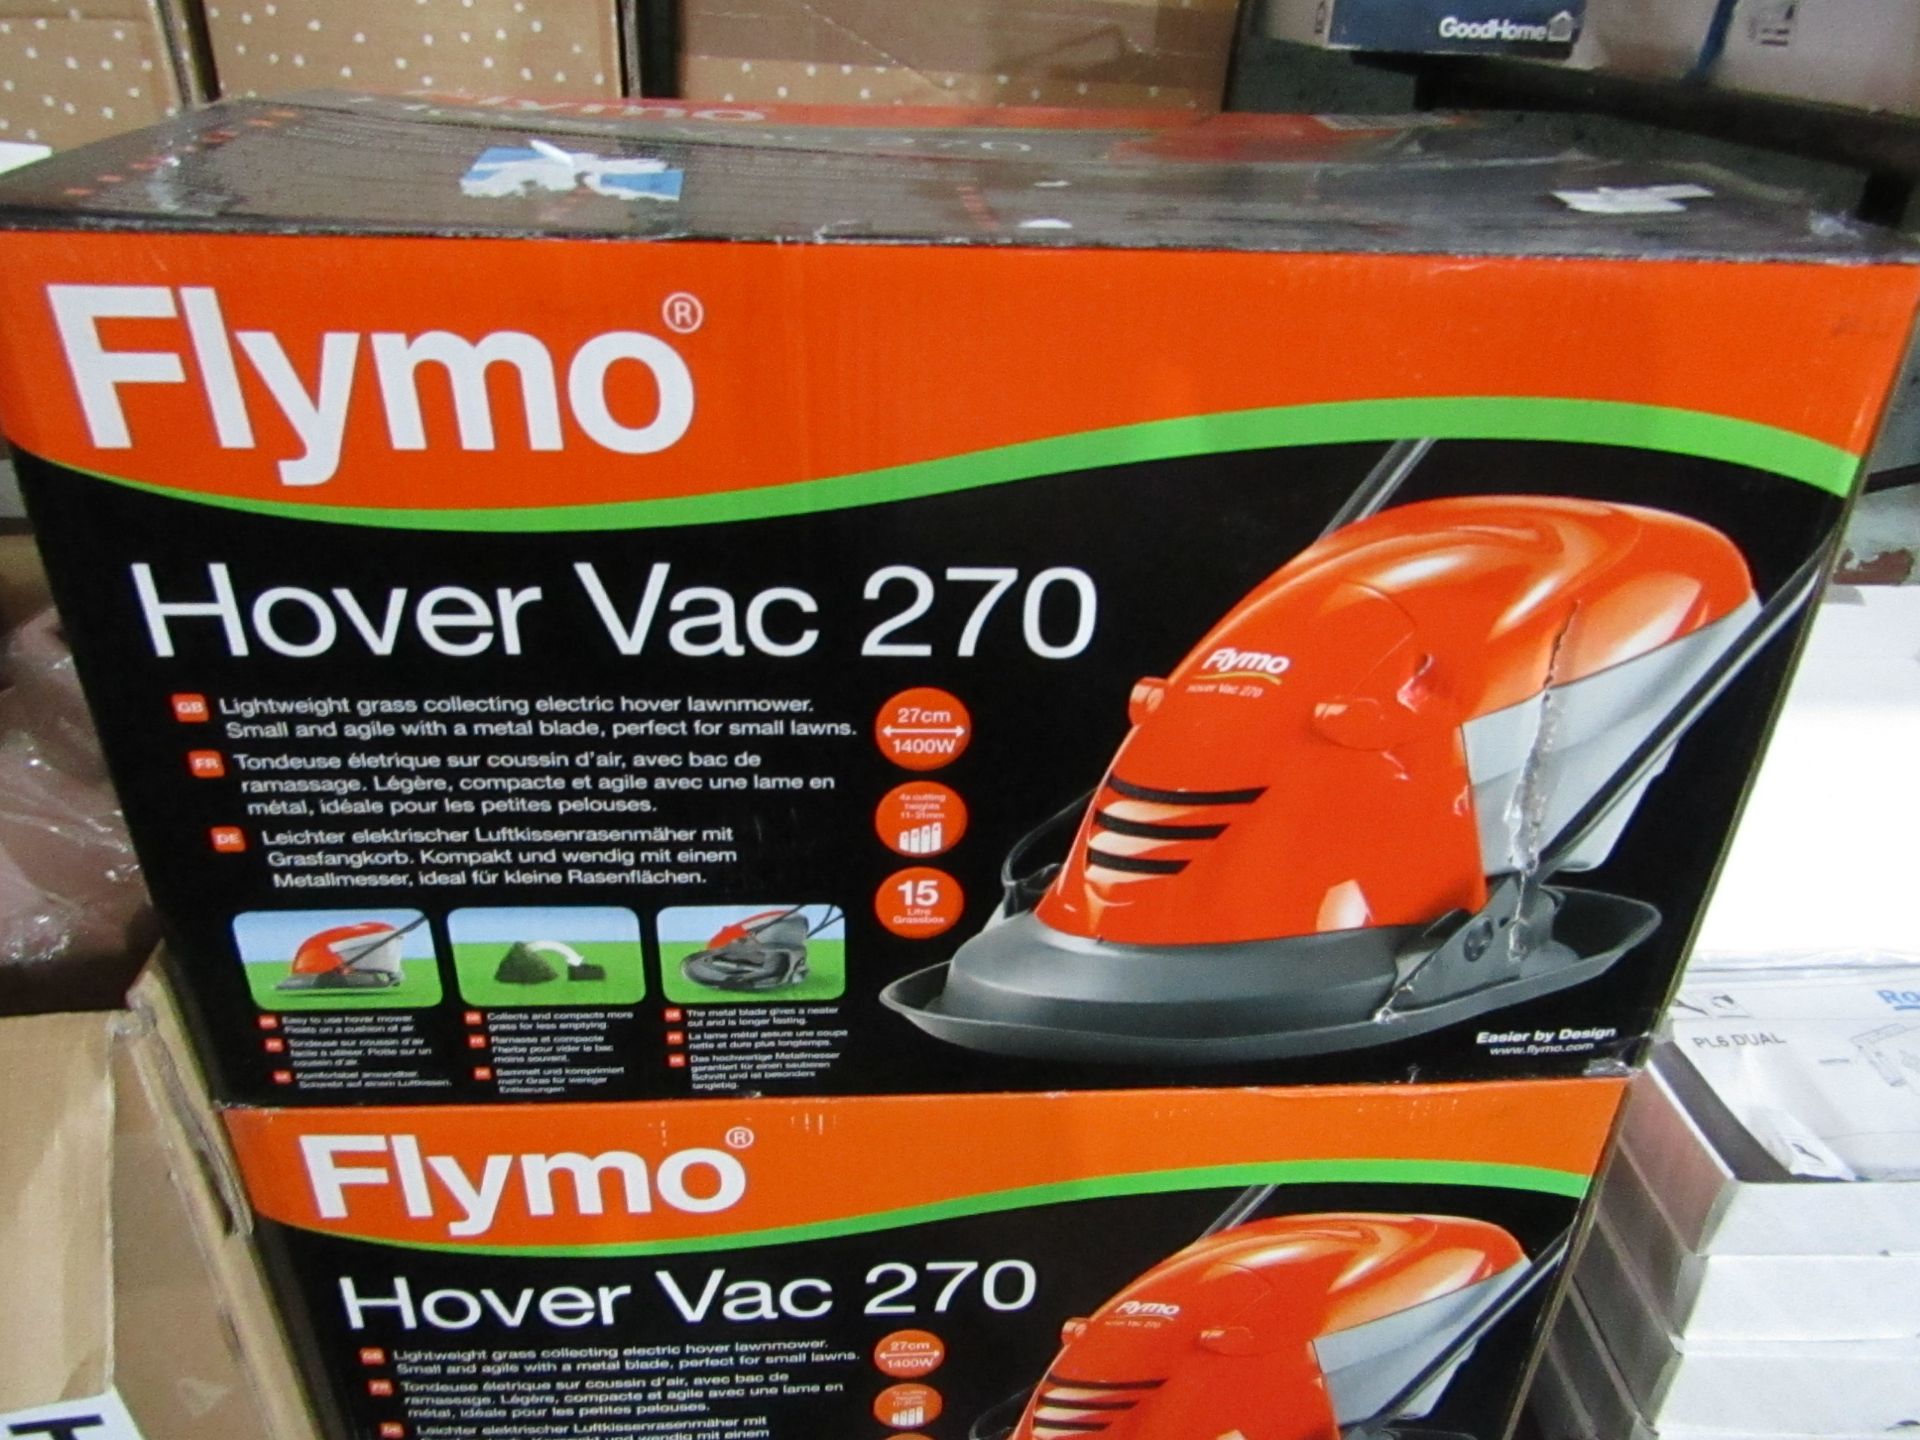 Flymo - Corded Electric Hover Vac 270 Lawnmower - Used Condition, Untested & Boxed. RRP œ95.